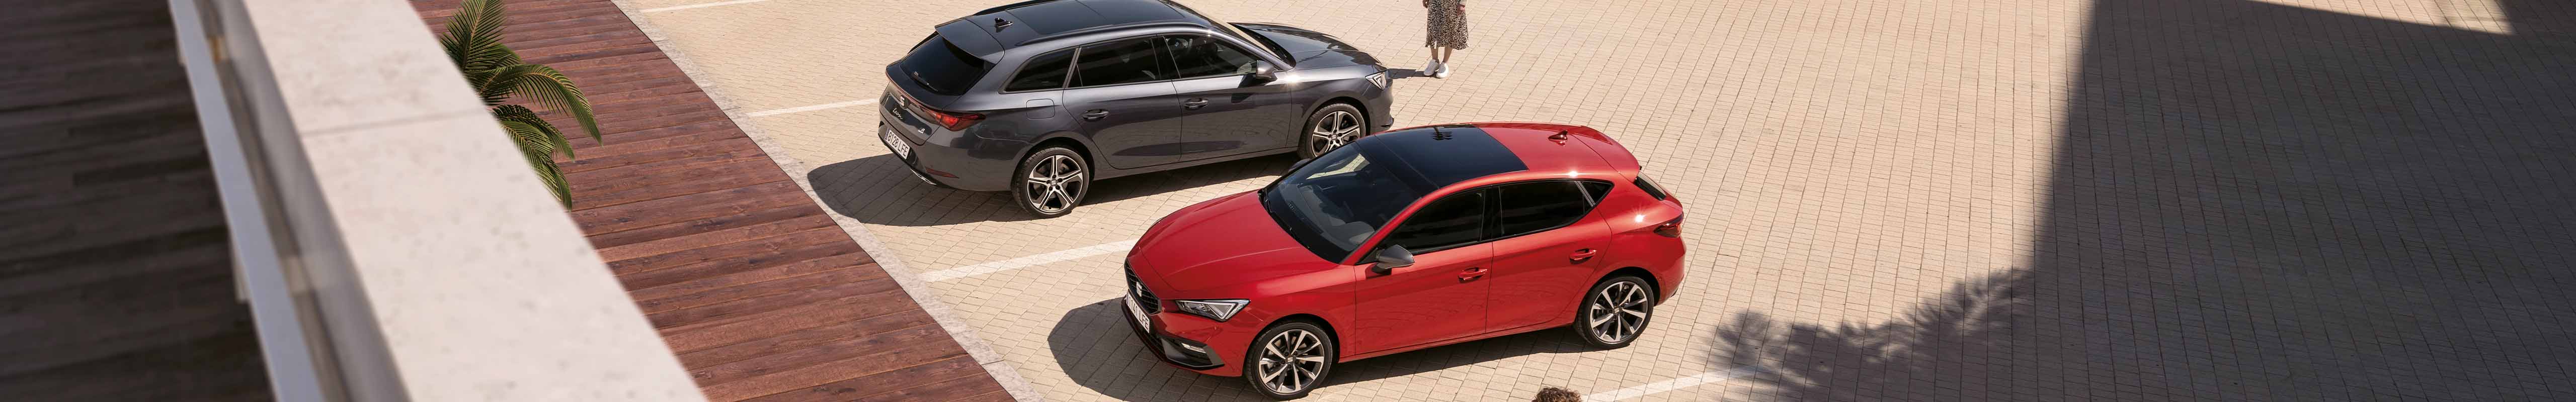  Bird's eye view of two SEAT Leon cars, one in Magnetic Tech Grey and the other in Desire Red, parked with a woman walking by.